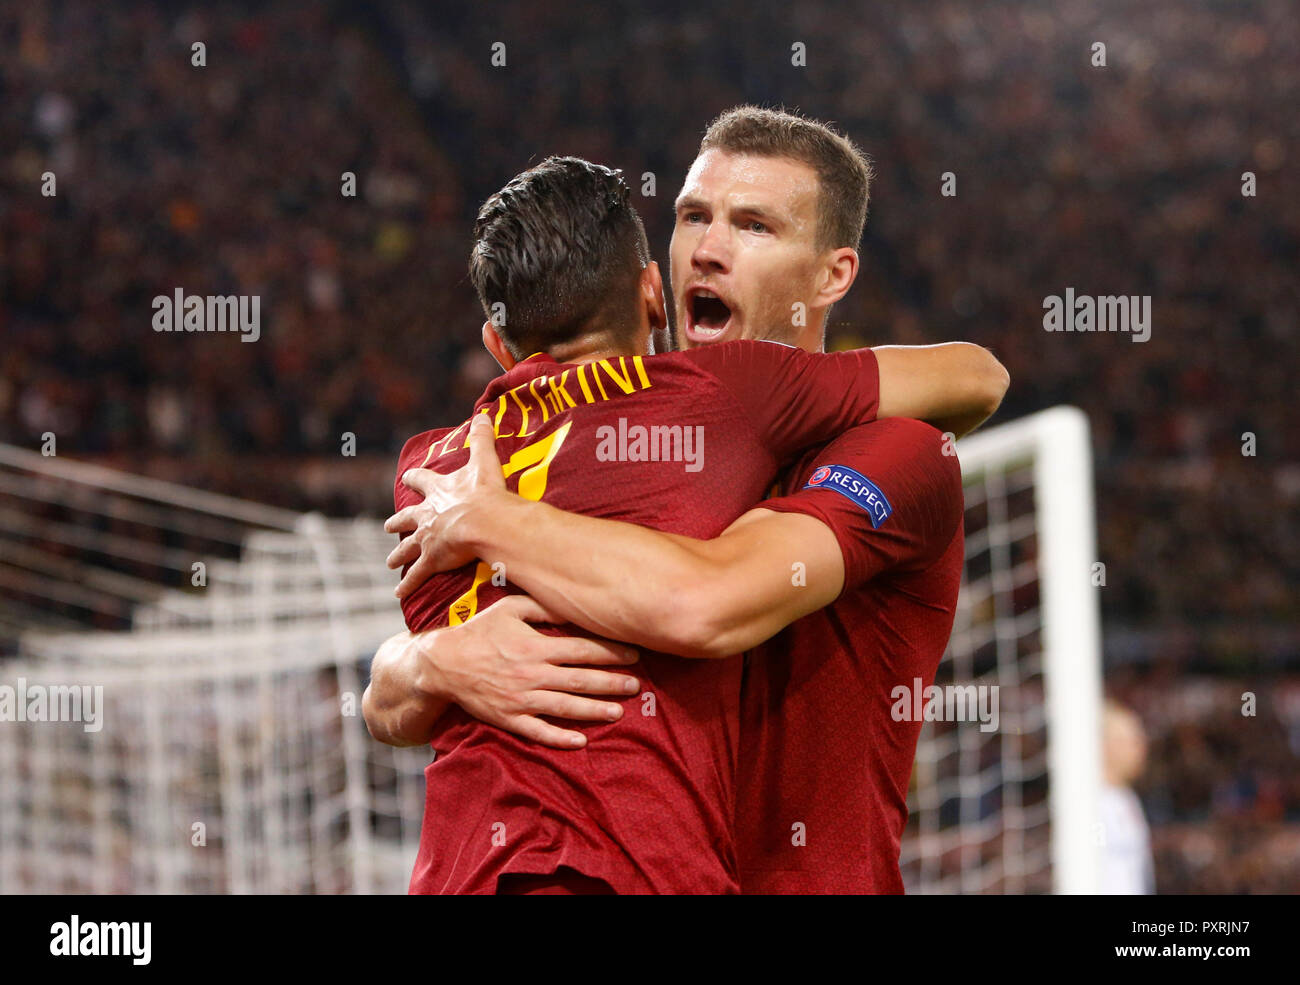 Rome, Italy, 23rd October, 2018. Roma's Edin Dzeko, right, celebrates with his teammate Lorenzo Pellegrini after scoring during the Champions League Group G soccer match between Roma and CSKA Moscow at the Olympic Stadium. Roma won 3-0. © Riccardo De Luca UPDATE IMAGES/ Alamy Live News Stock Photo